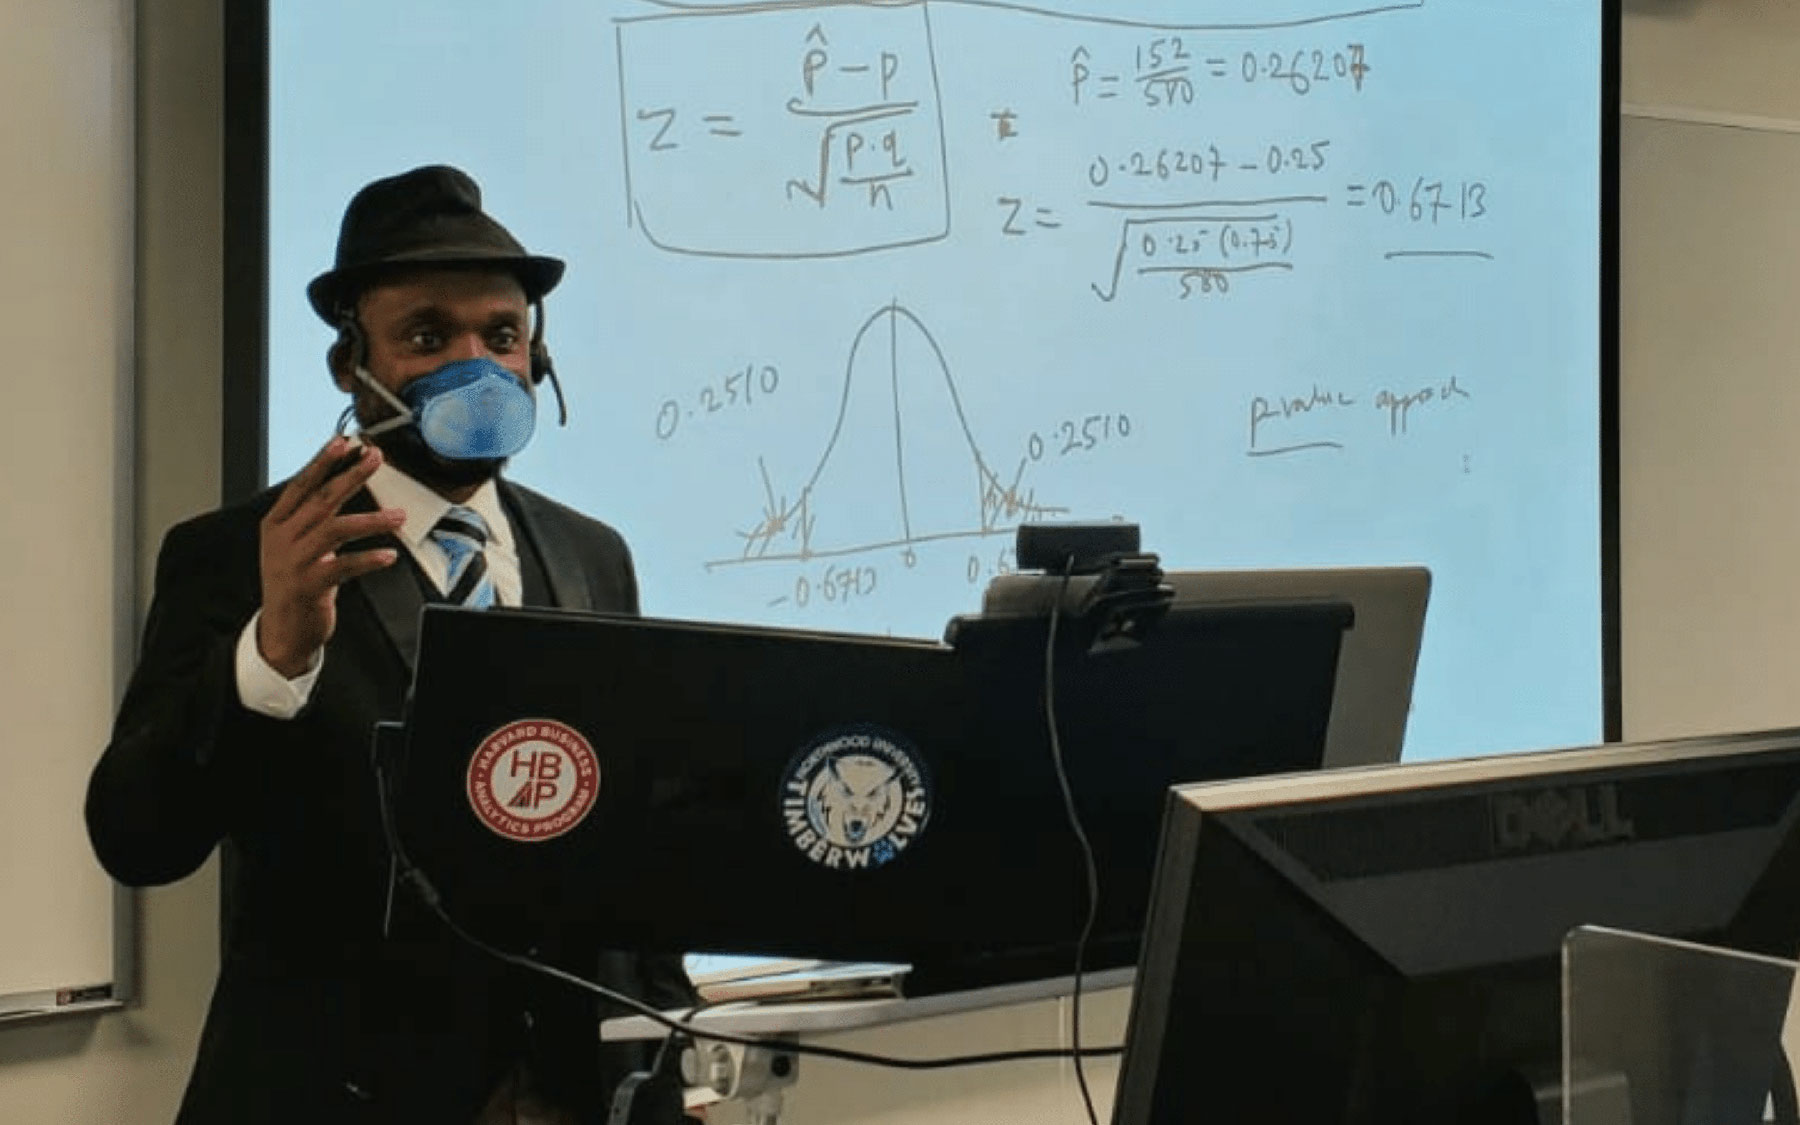 Dr. Itauma wears a mask and stands in front of a projector, teaching a class.